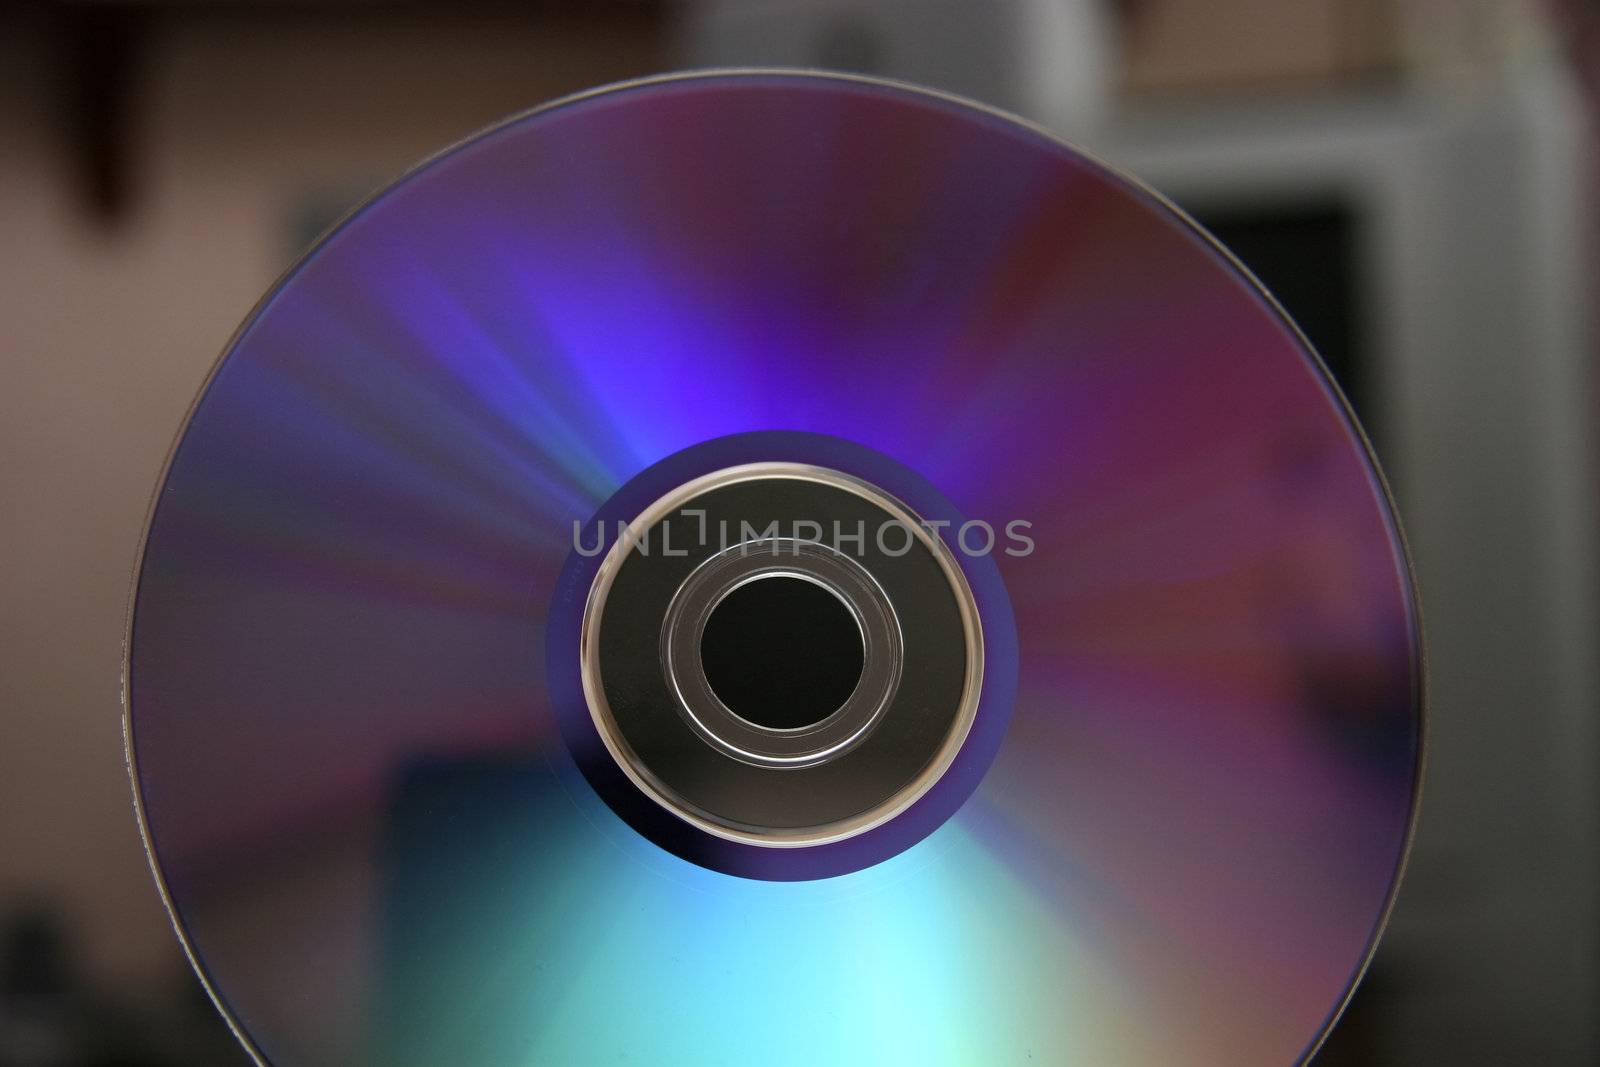 dvd or cd used as storage media for electronic data